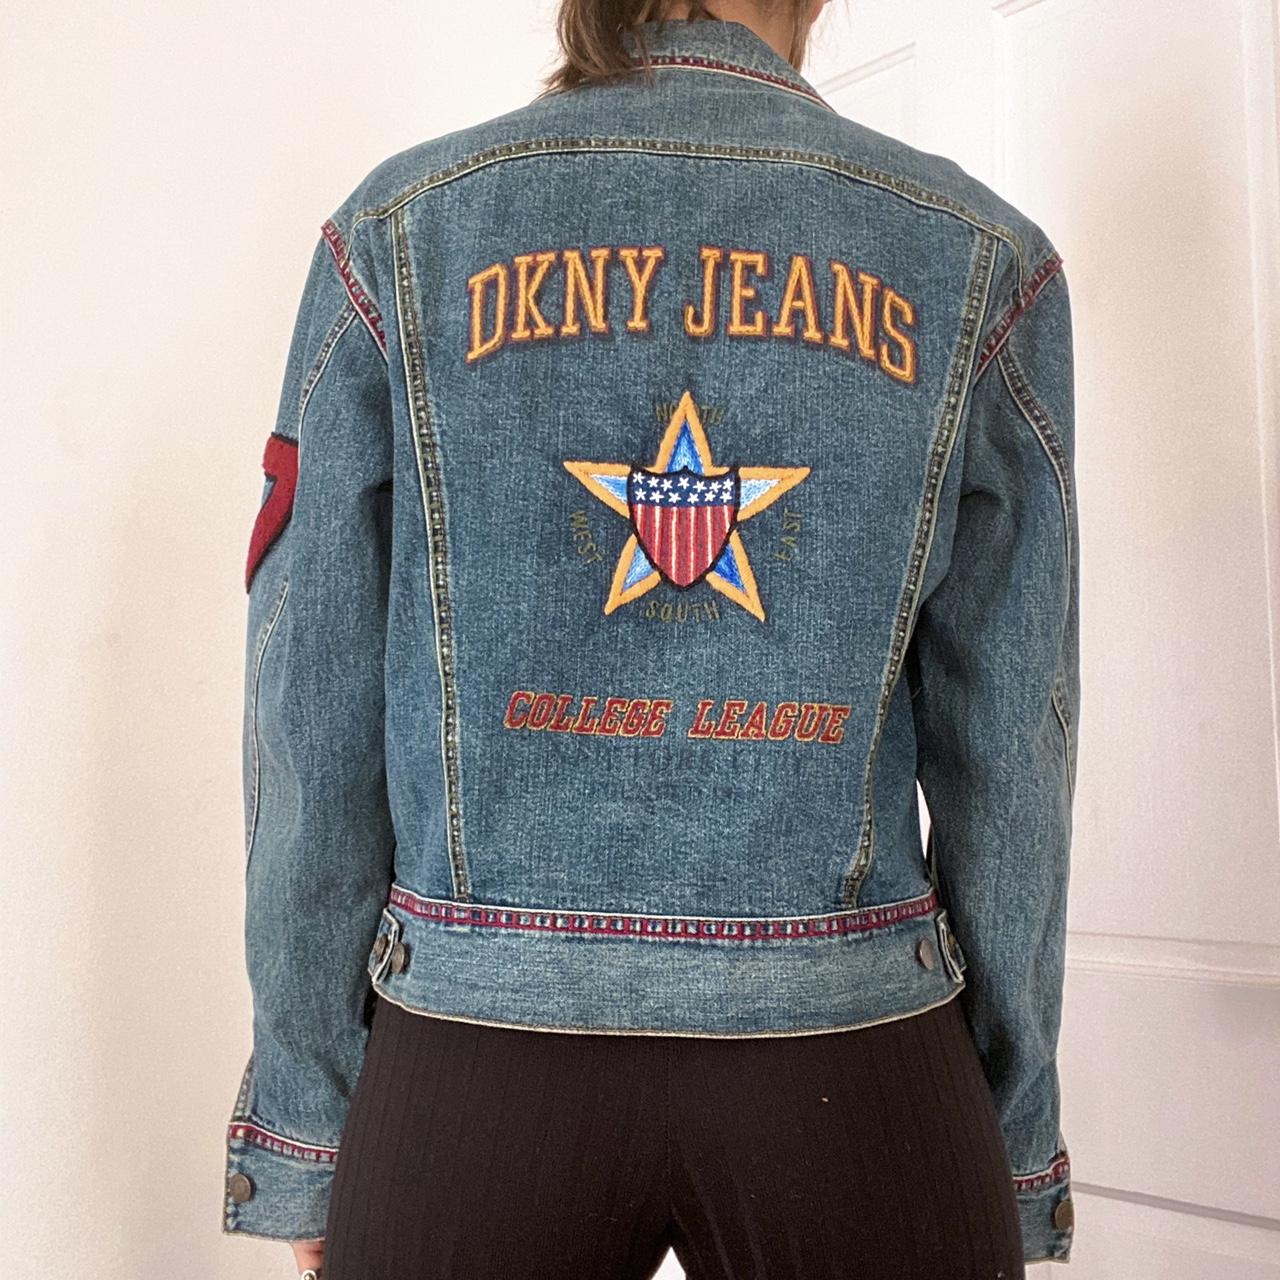 90s DKNY Jean Jacket with Patches This jacket is... Depop